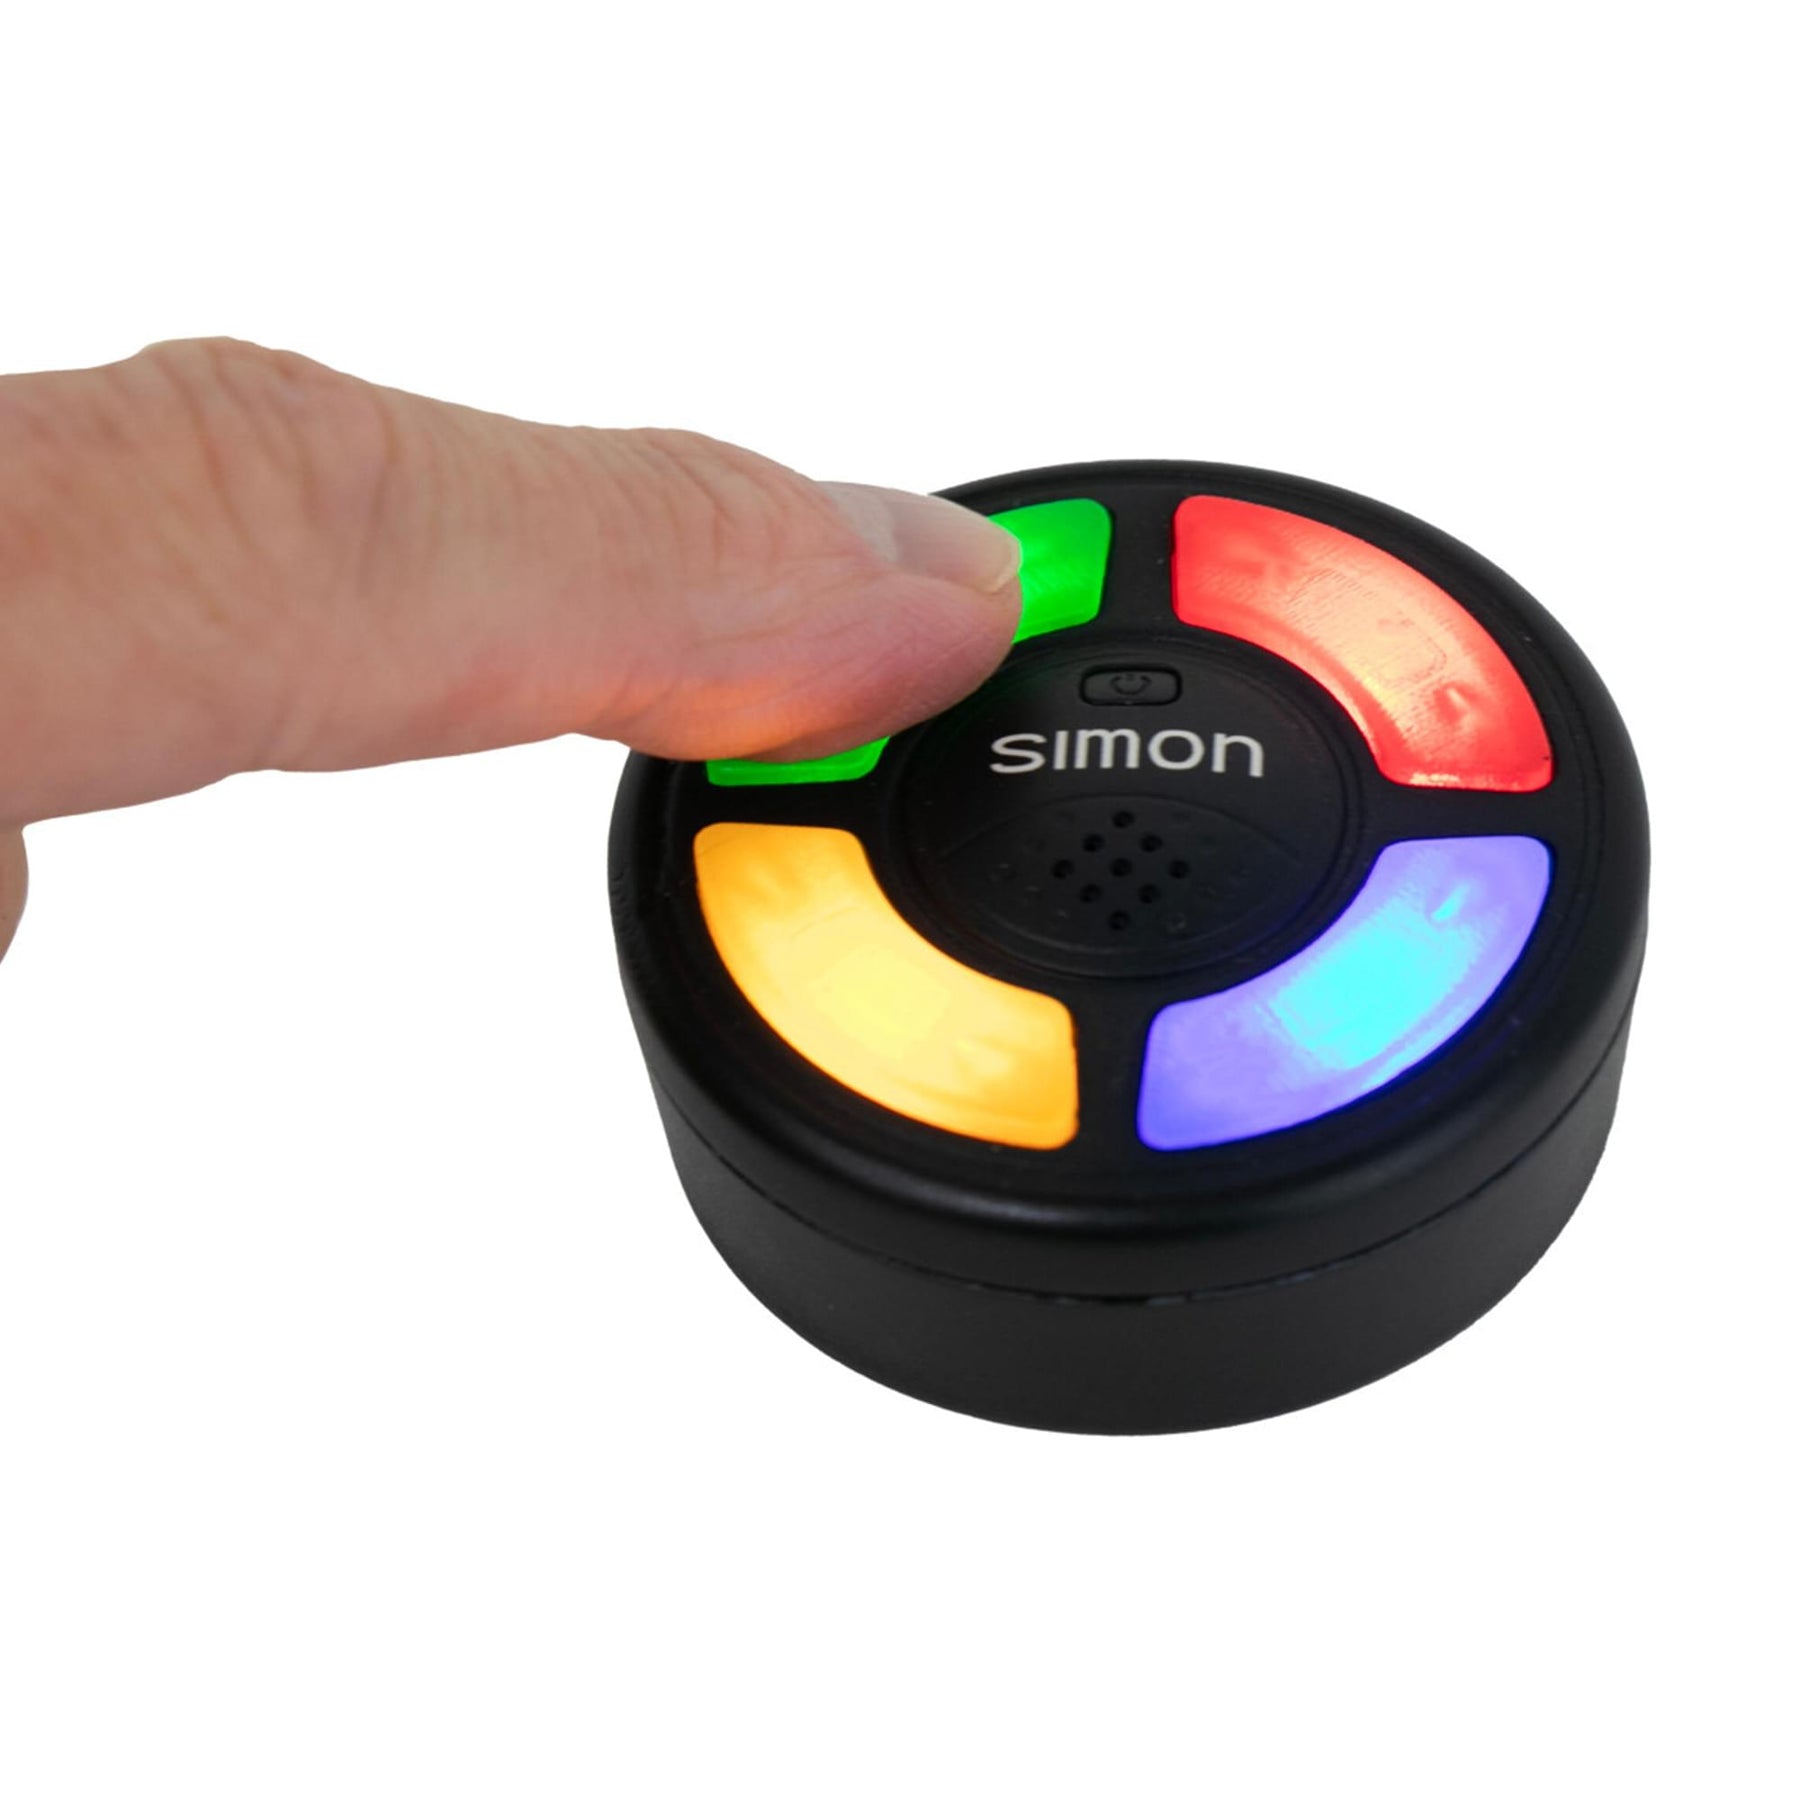 Worlds Smallest Simon Electronic Game